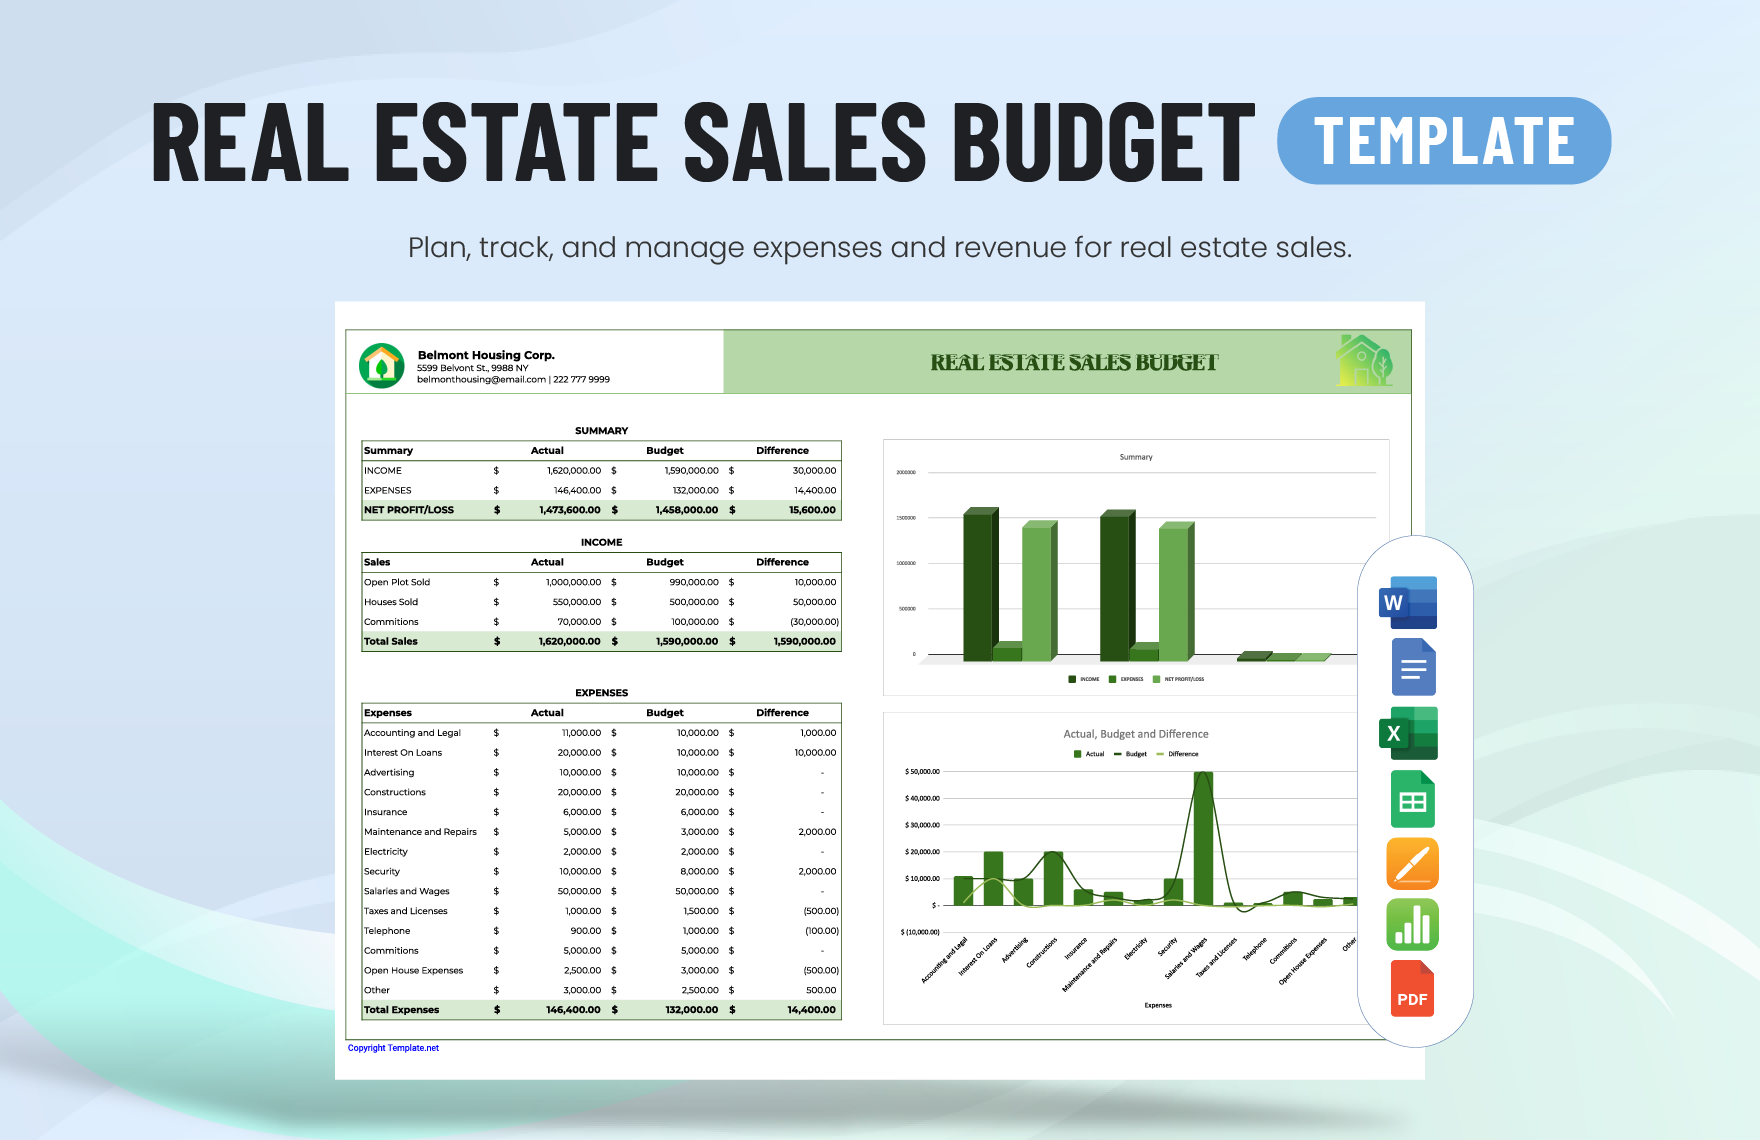 Real Estate Sales Budget Template in Word, Google Docs, Excel, PDF, Google Sheets, Apple Pages, Apple Numbers